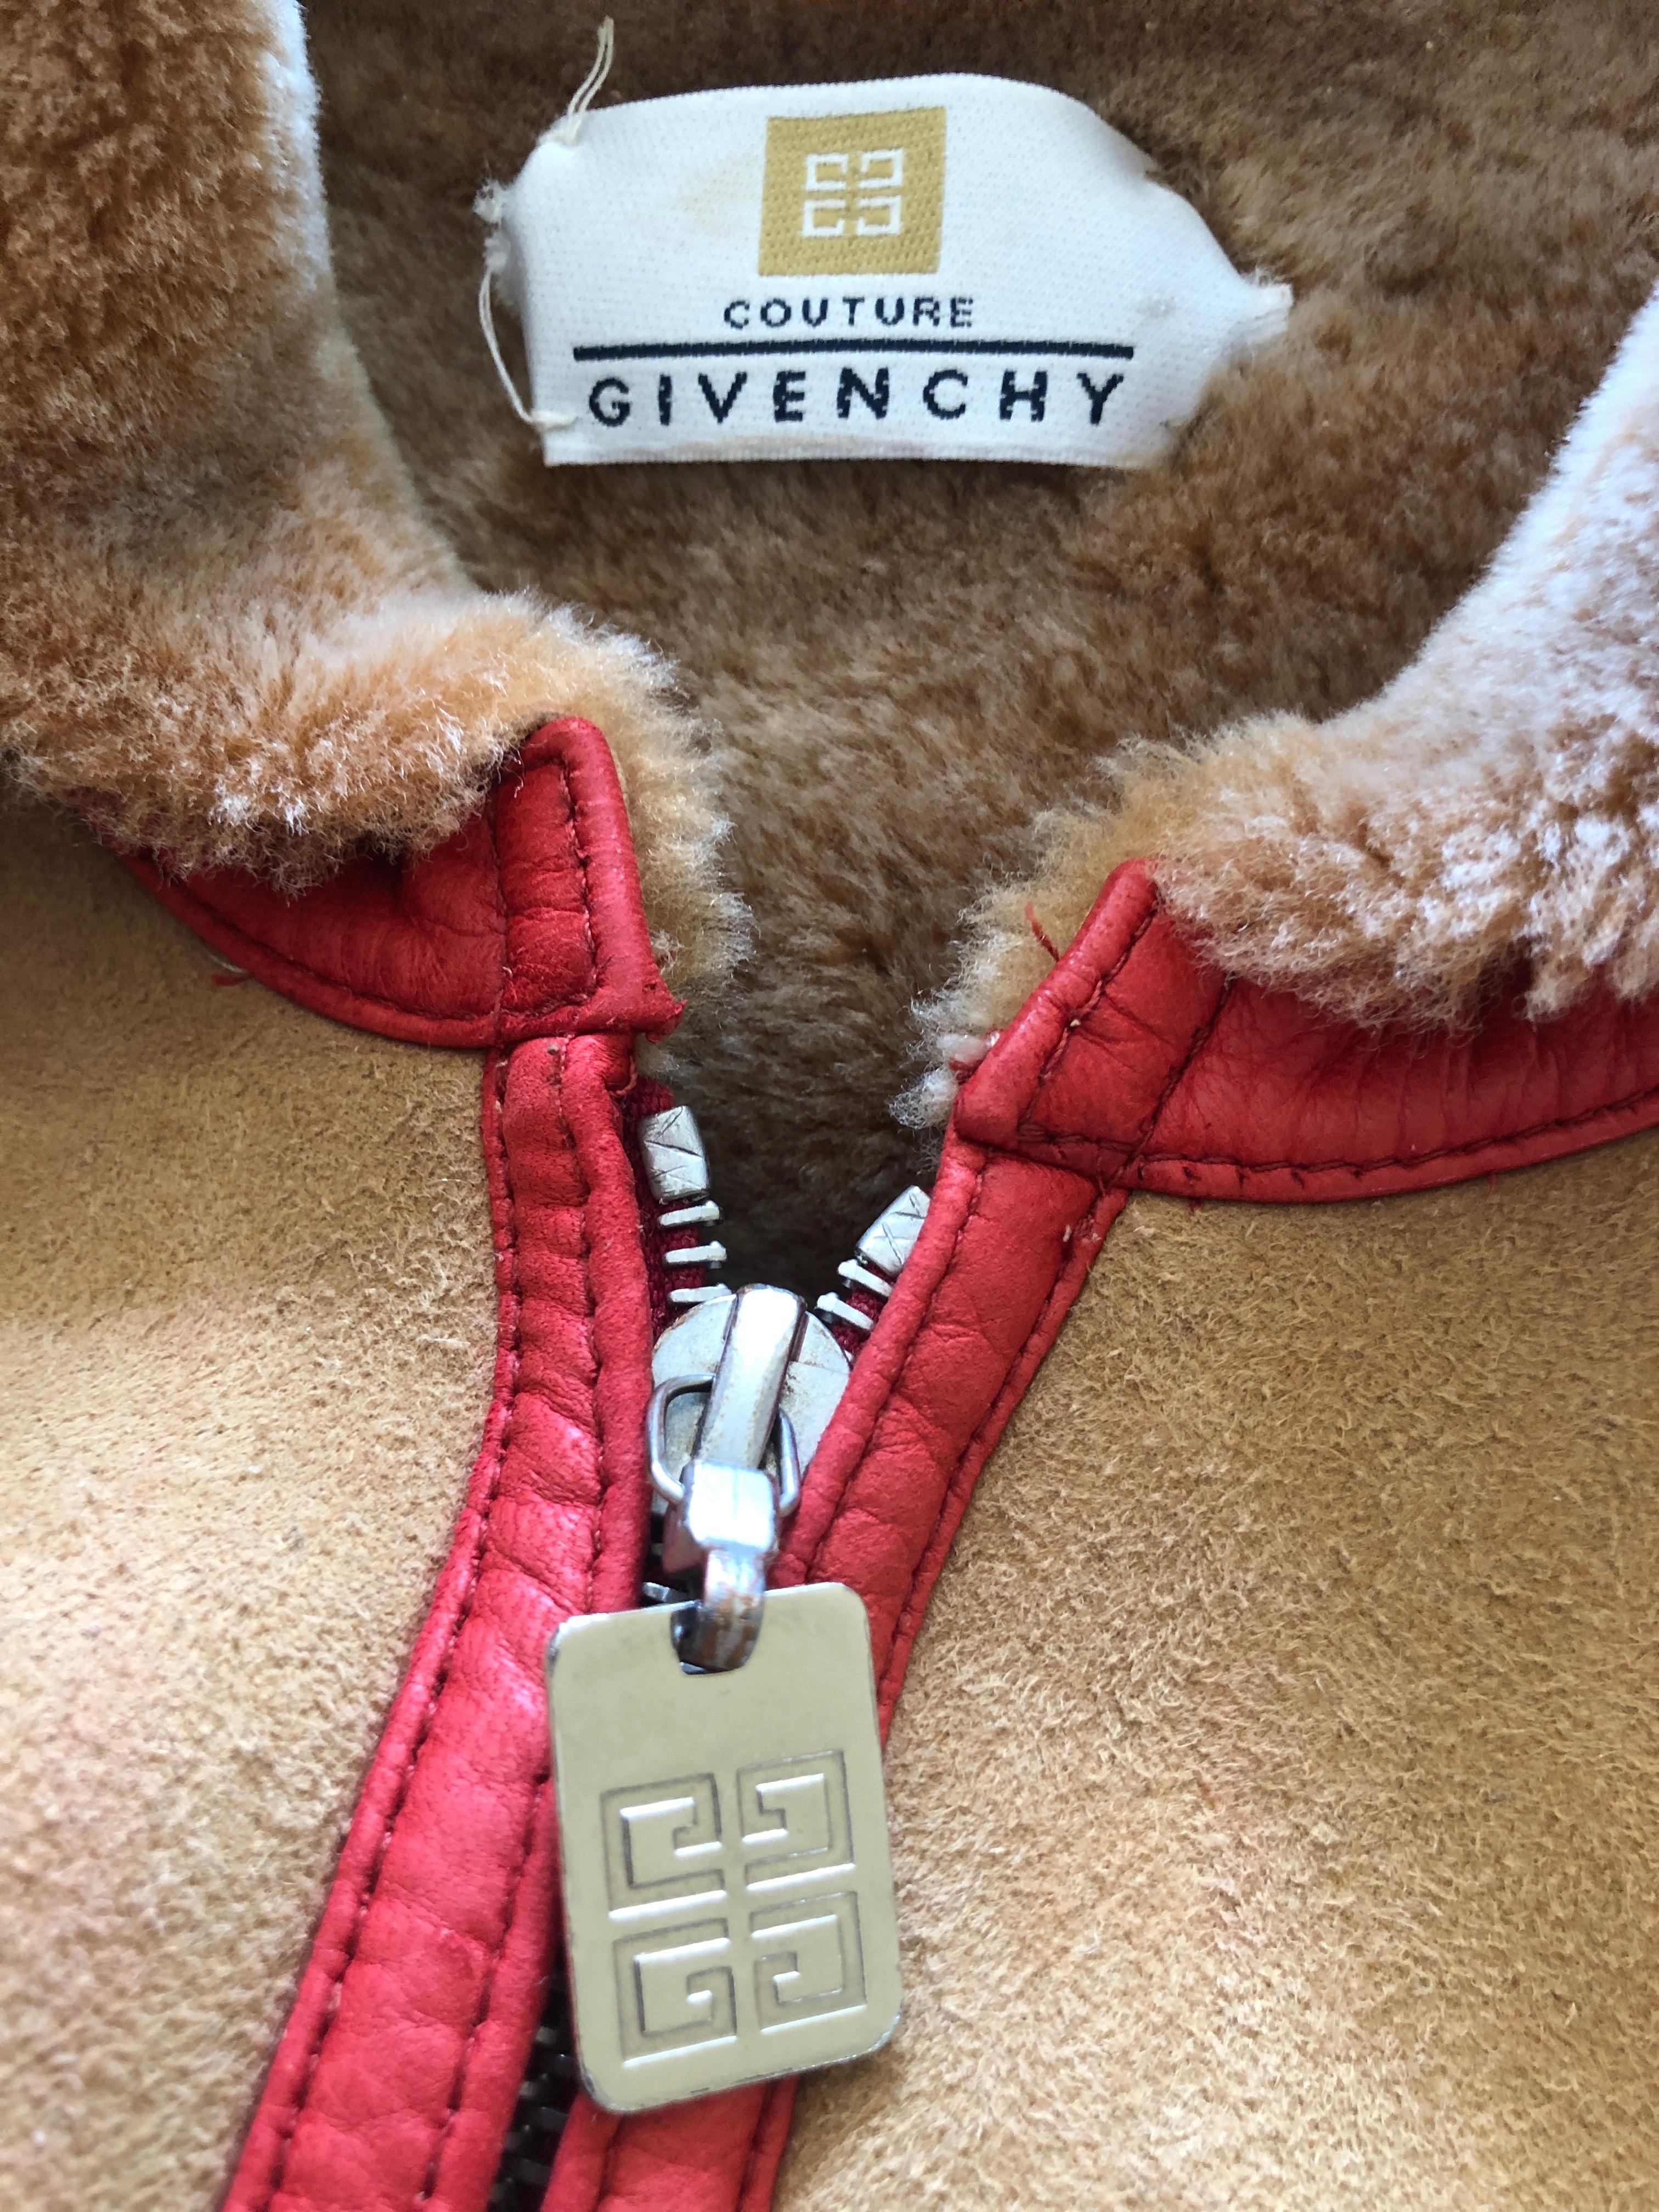 Givenchy Haute Couture A/W 1998 by Alexander McQueen Red Trim Shearling Jacket.
So elegant, early Alexander McQueen exhibits details he would revisit in his own future collections.
Haute couture, so no size tag
Bust 36